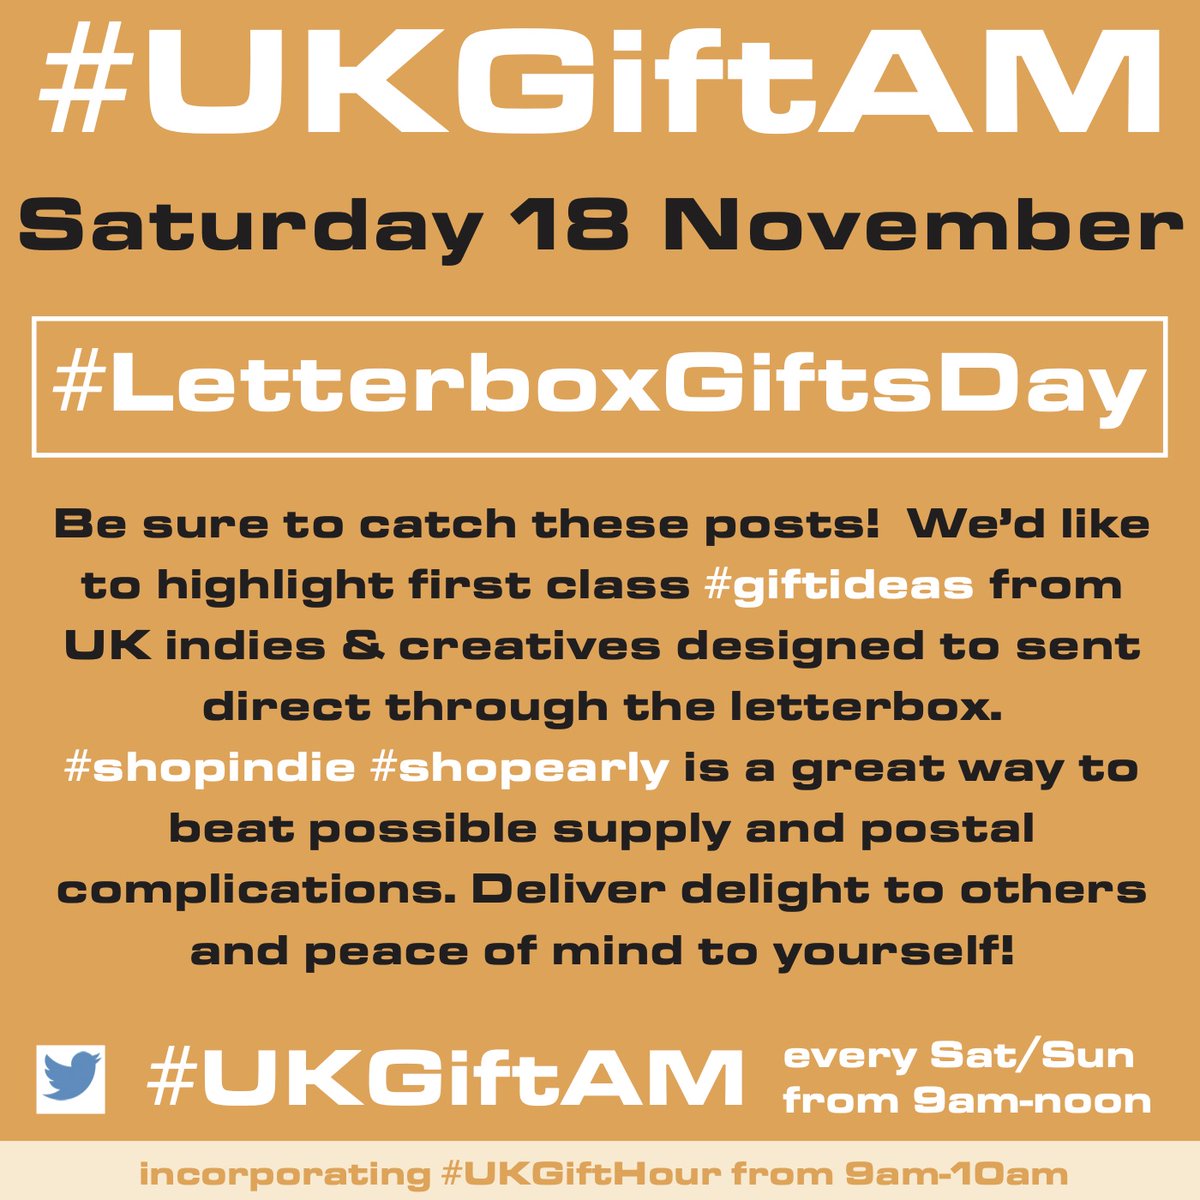 38 days to go. . . if you'd like to deliver delight through the post with distinctive #giftideas from #shopindie creatives, don't leave too much to chance! Find it and order it using our special #LetterboxGiftsDay on #UKGiftHour #UKGiftAM this weekend 🤗🎁 #planahead #EarlyBiz